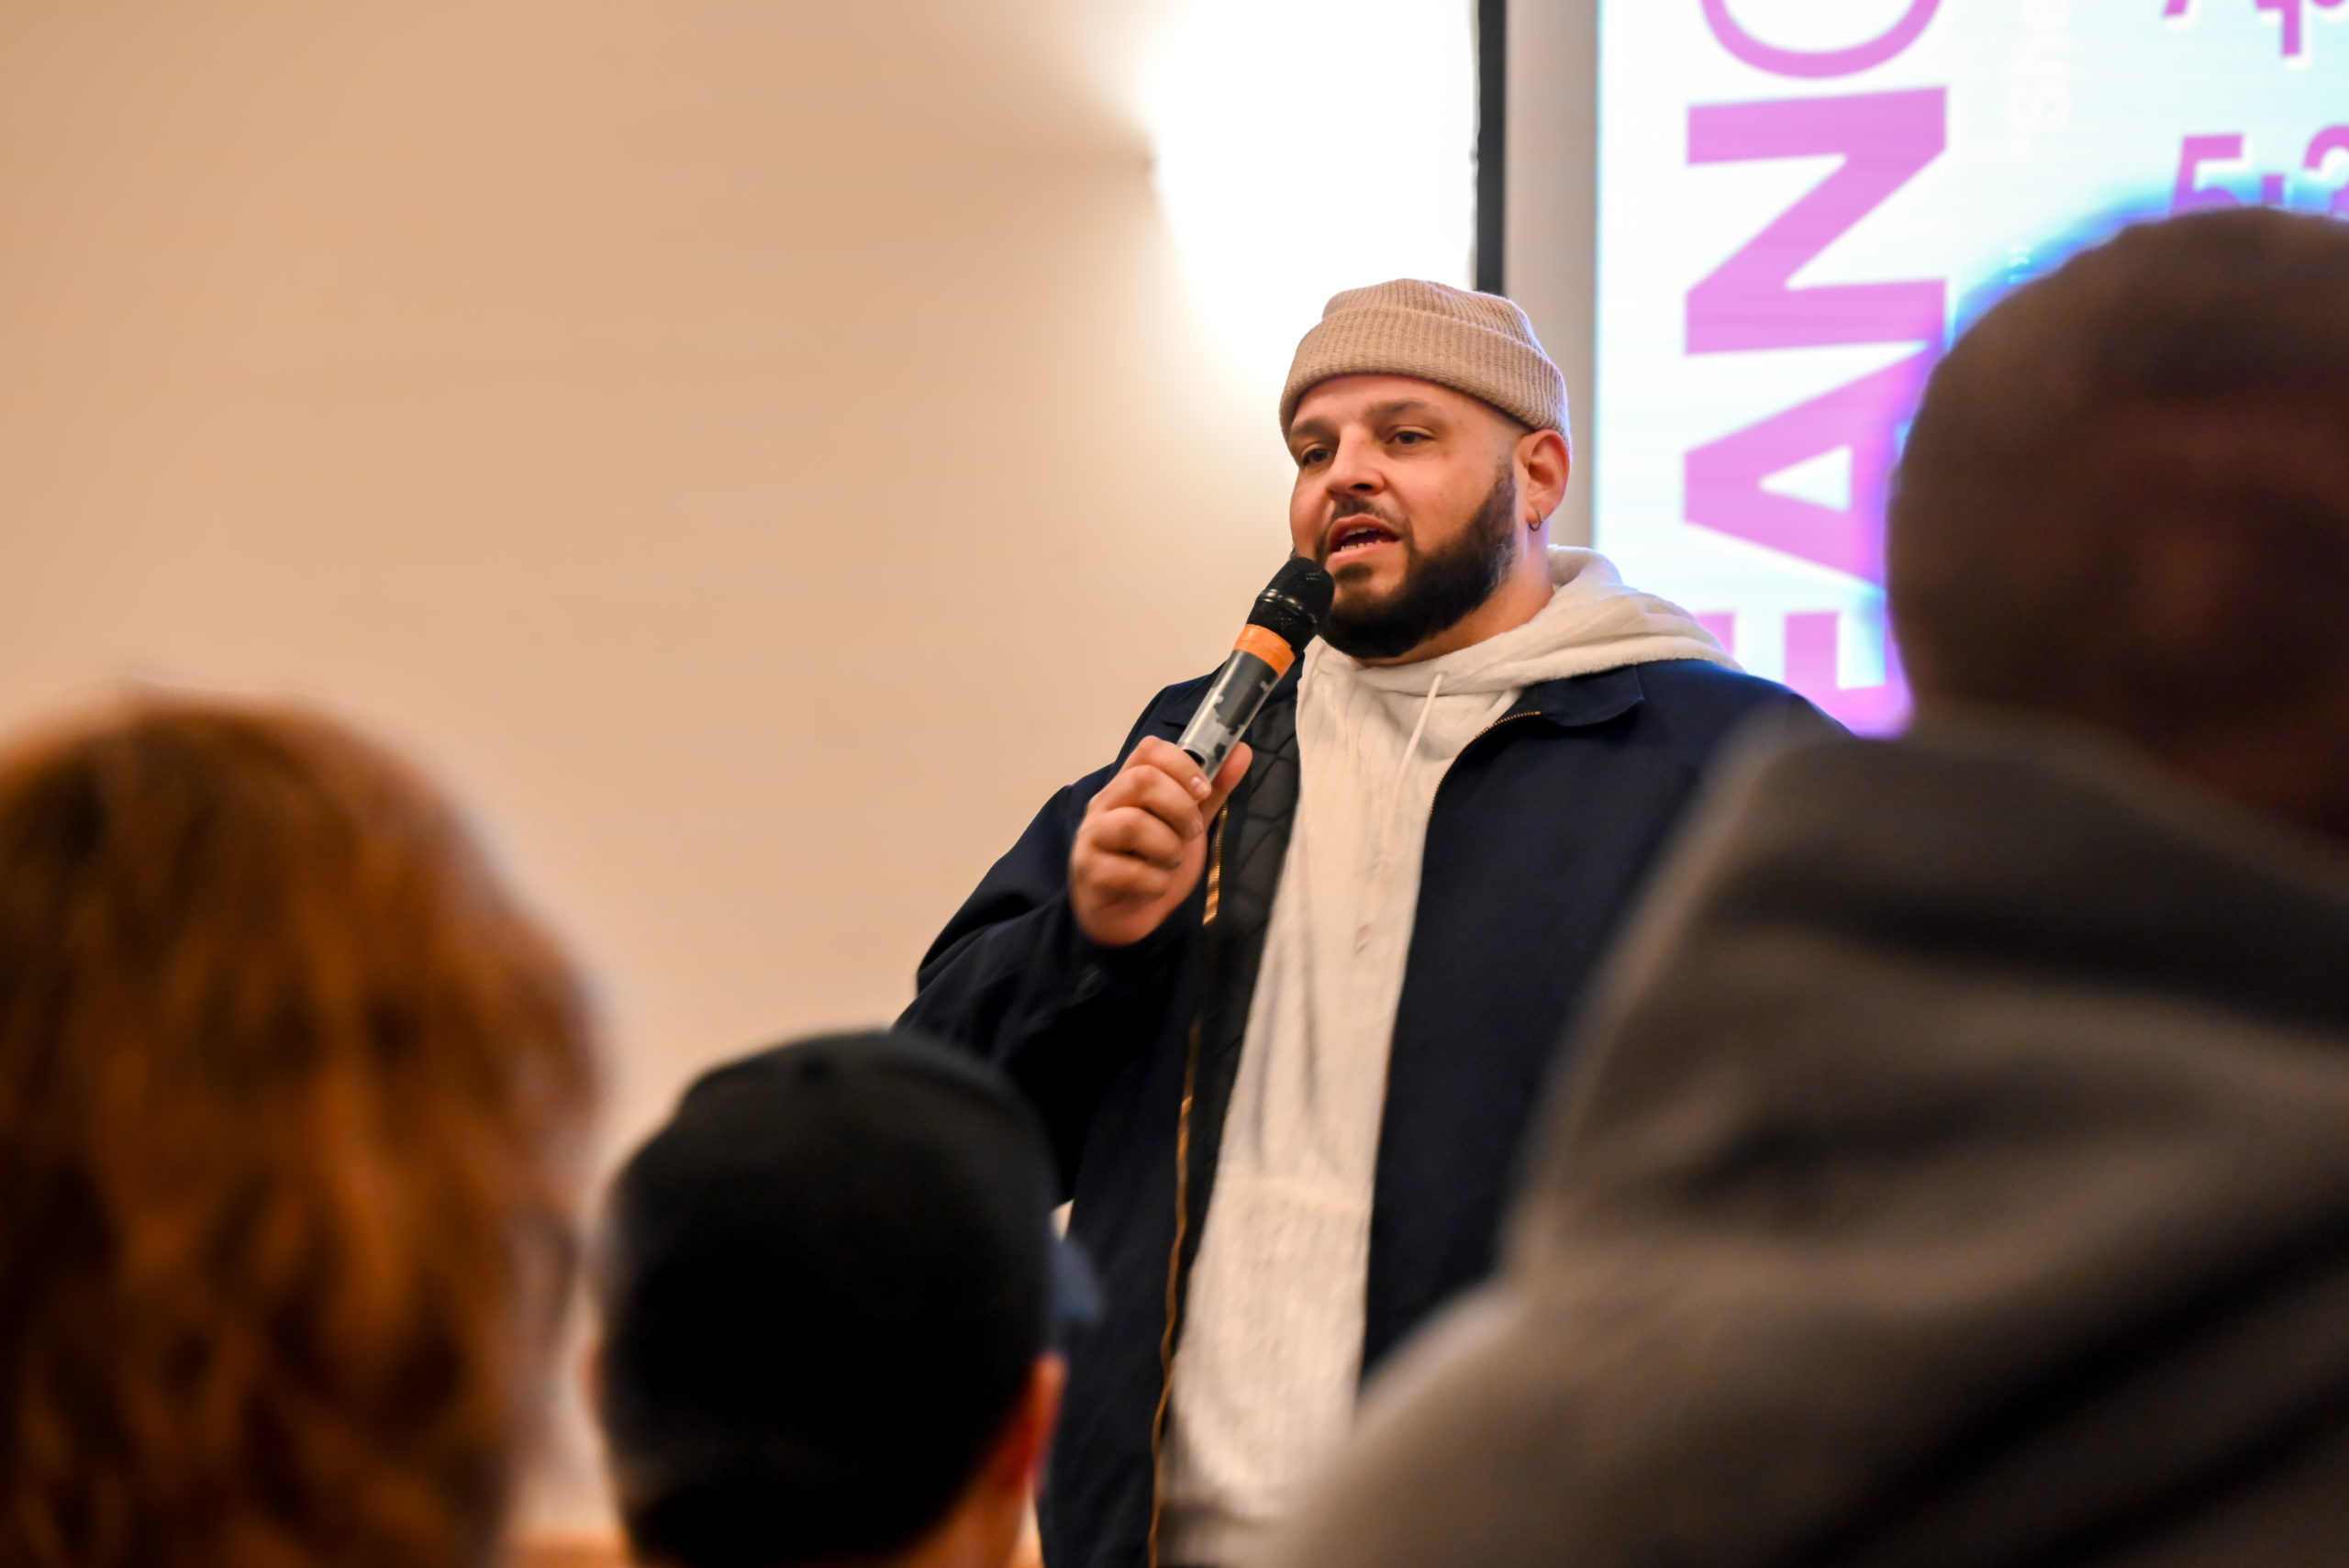 Daniel Franzese engaging with students at the “Mean Girls” after the movie. (William Galloway Photo)